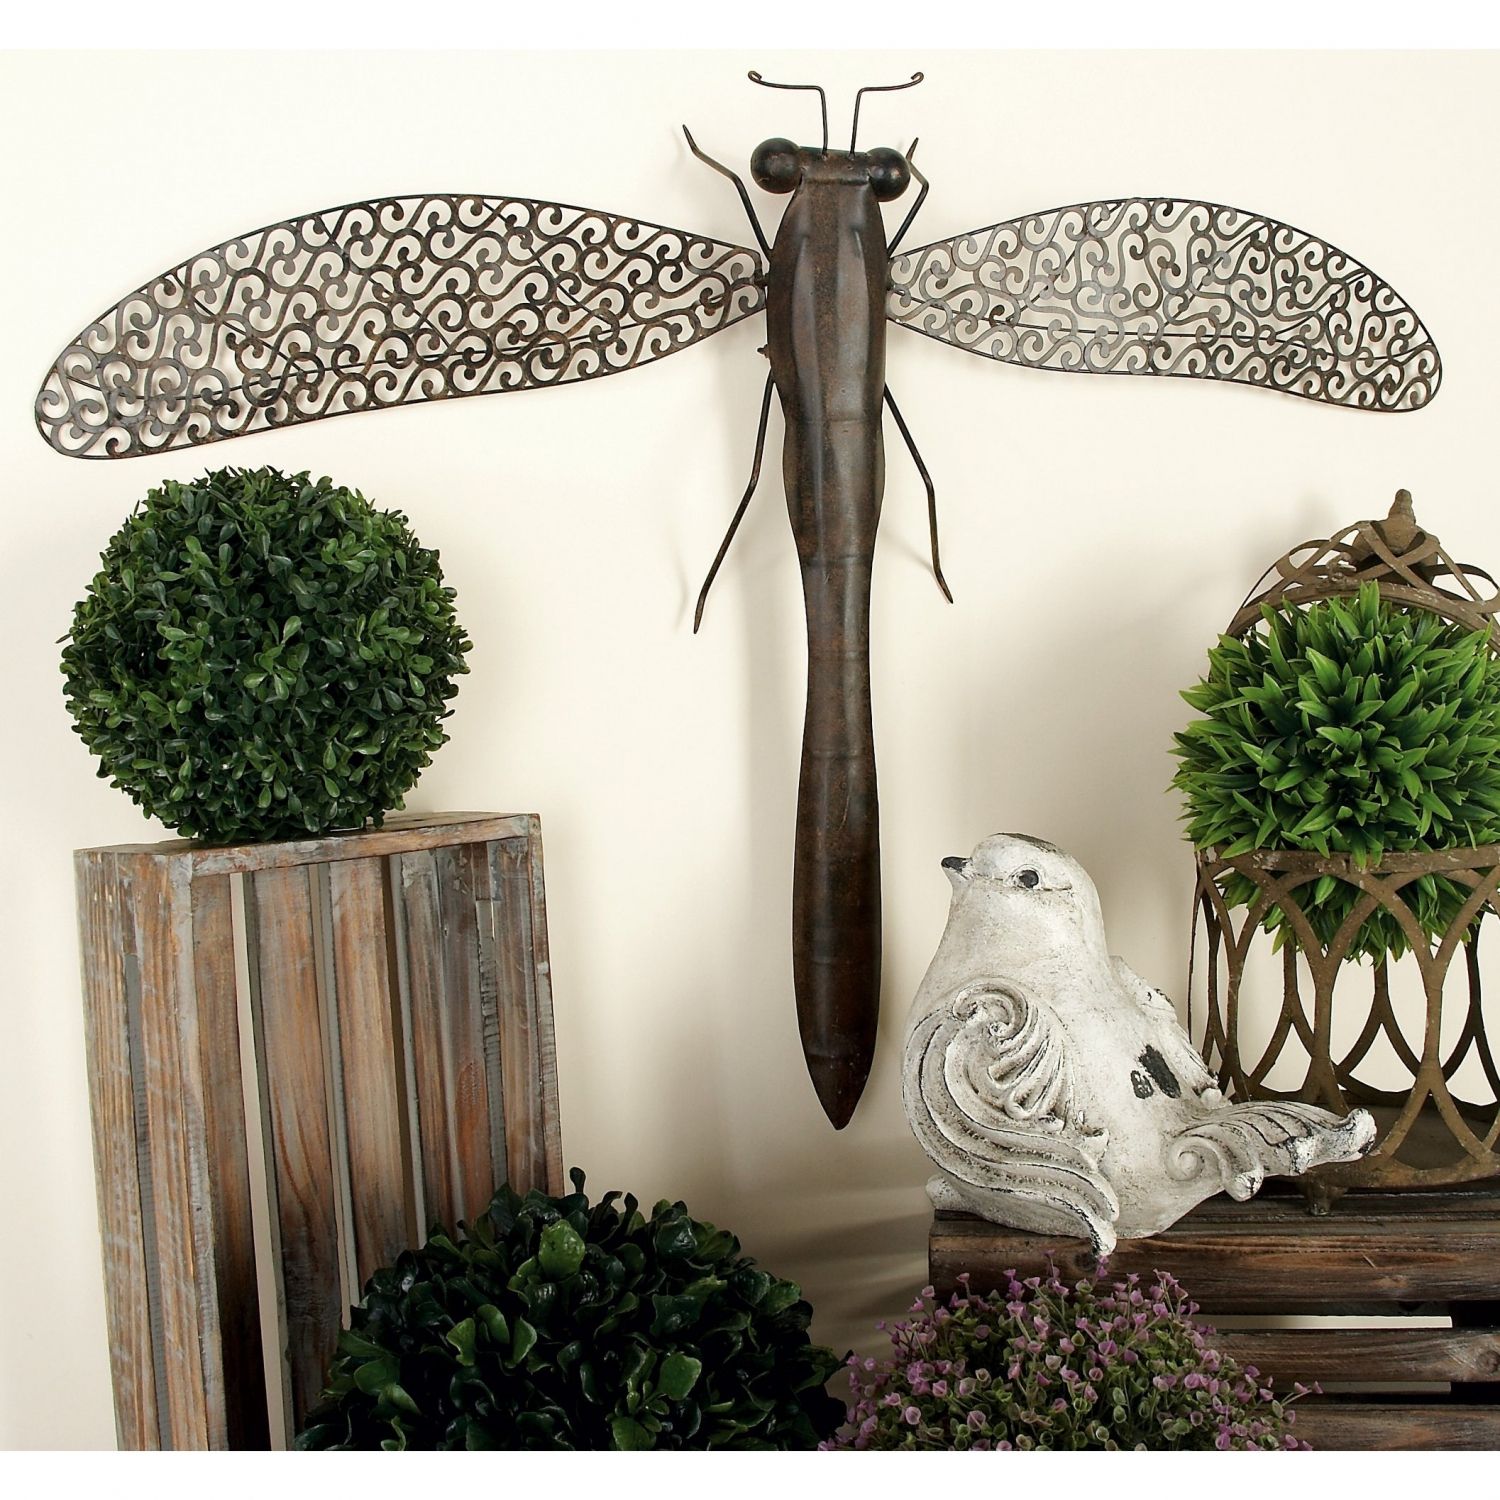 Large Metal Dragonfly Wall Art Sculpture Figurine Indoor/outdoor Rust Throughout Most Popular Dragonflies Wall Art (View 11 of 20)